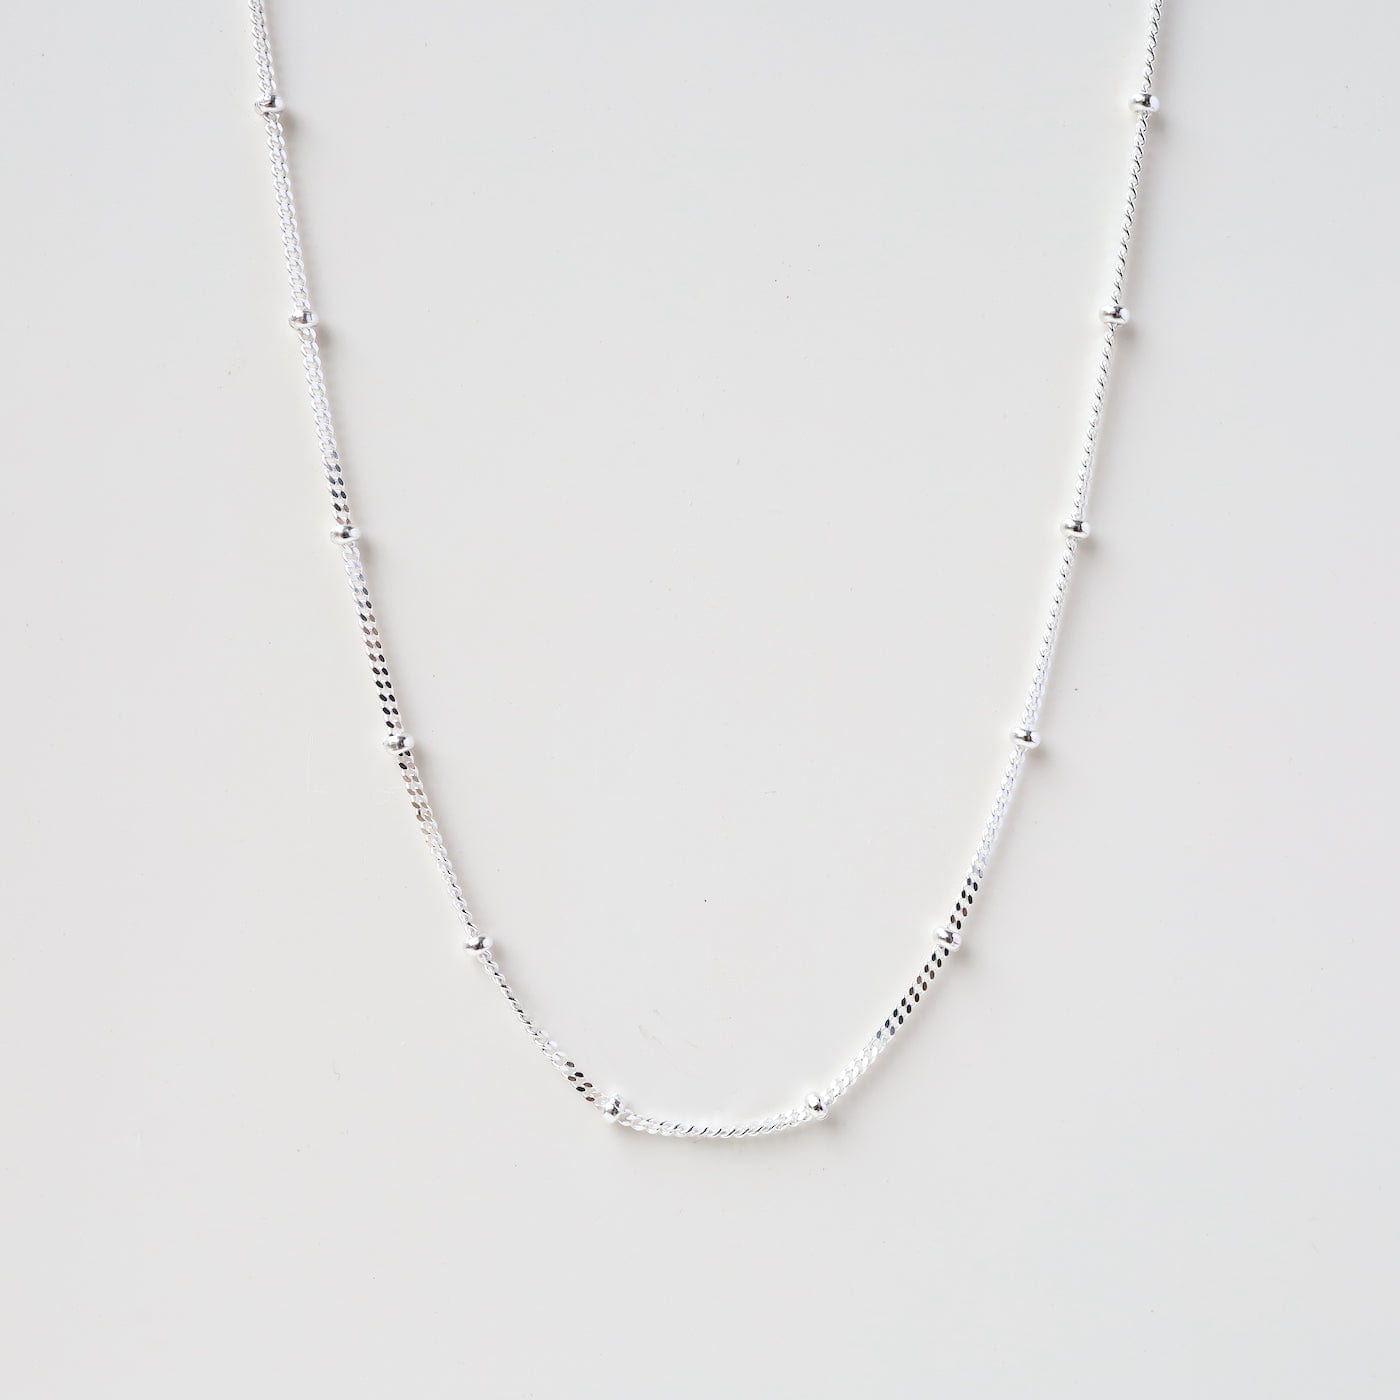 CHN Sterling Silver Curb Chain with Bead Stations - 16" to 18"